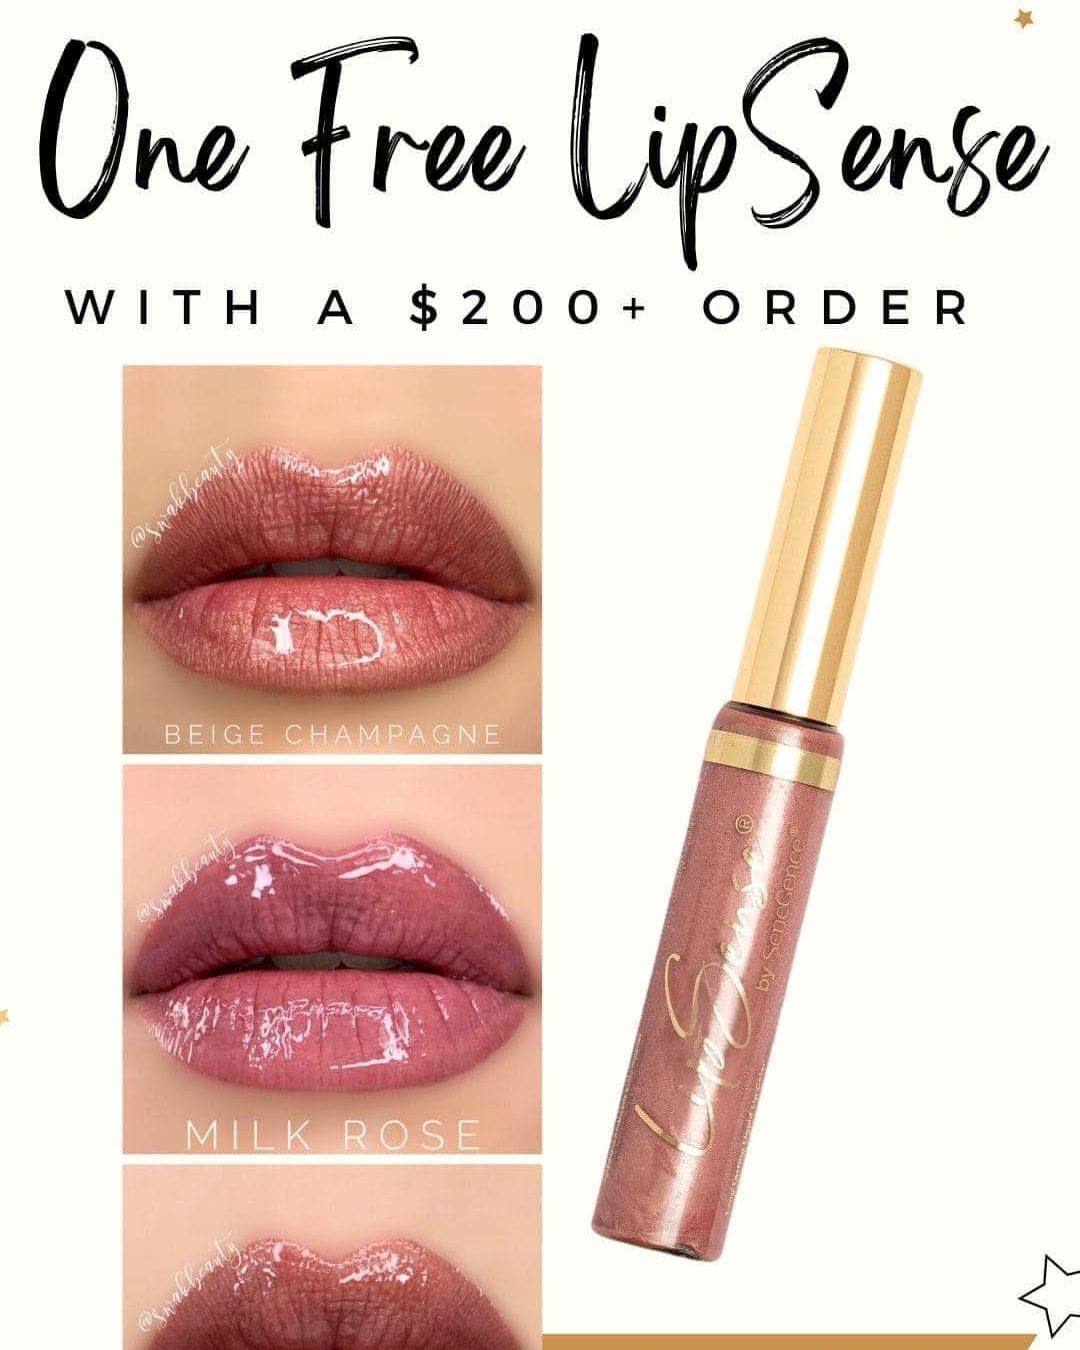 Okay Y’all, In honor of the 25th anniversary of Lipsense, All Kiss & Tell members get a FREE LipSense when you place a $200 + order!! 

TODAY ONLY!!! Ladies dont sleep on this deal…